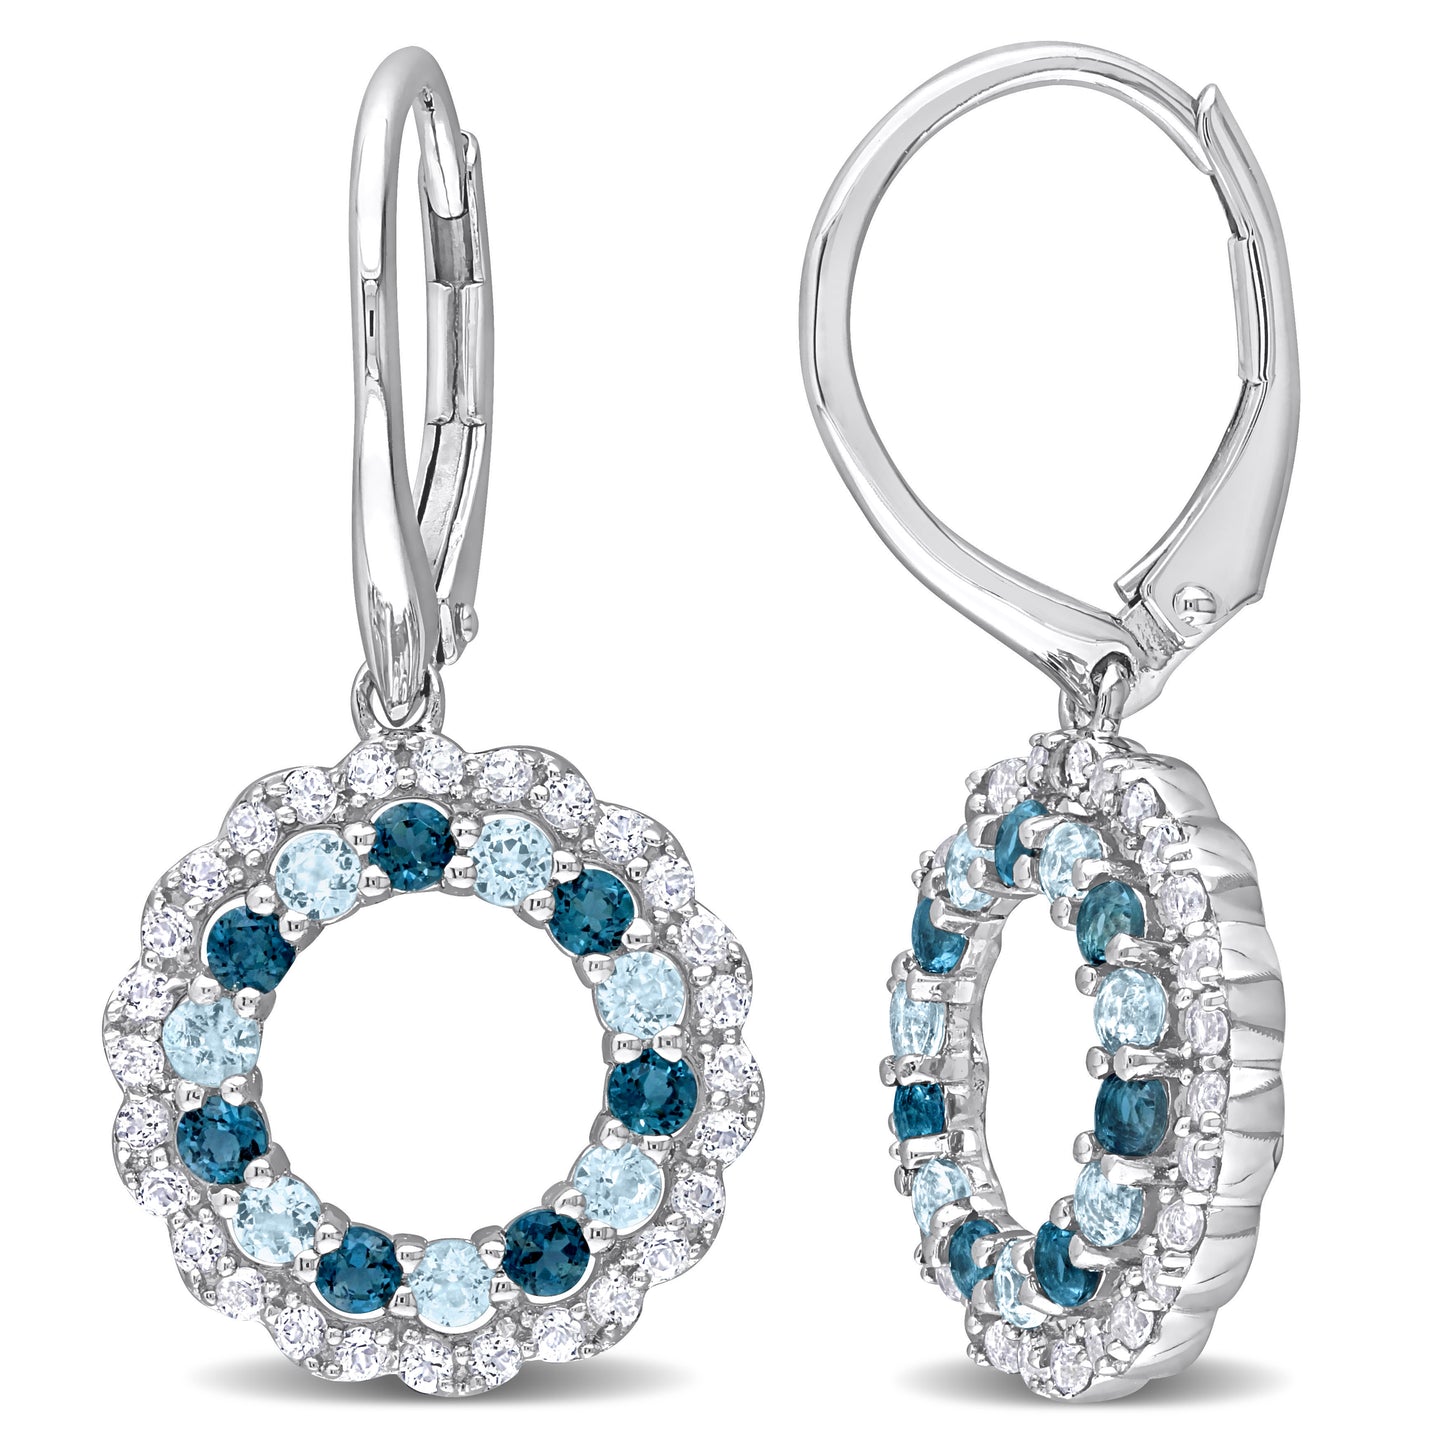 2ct Blue & White Topaz Double Circle Earrings in Sterling Silver